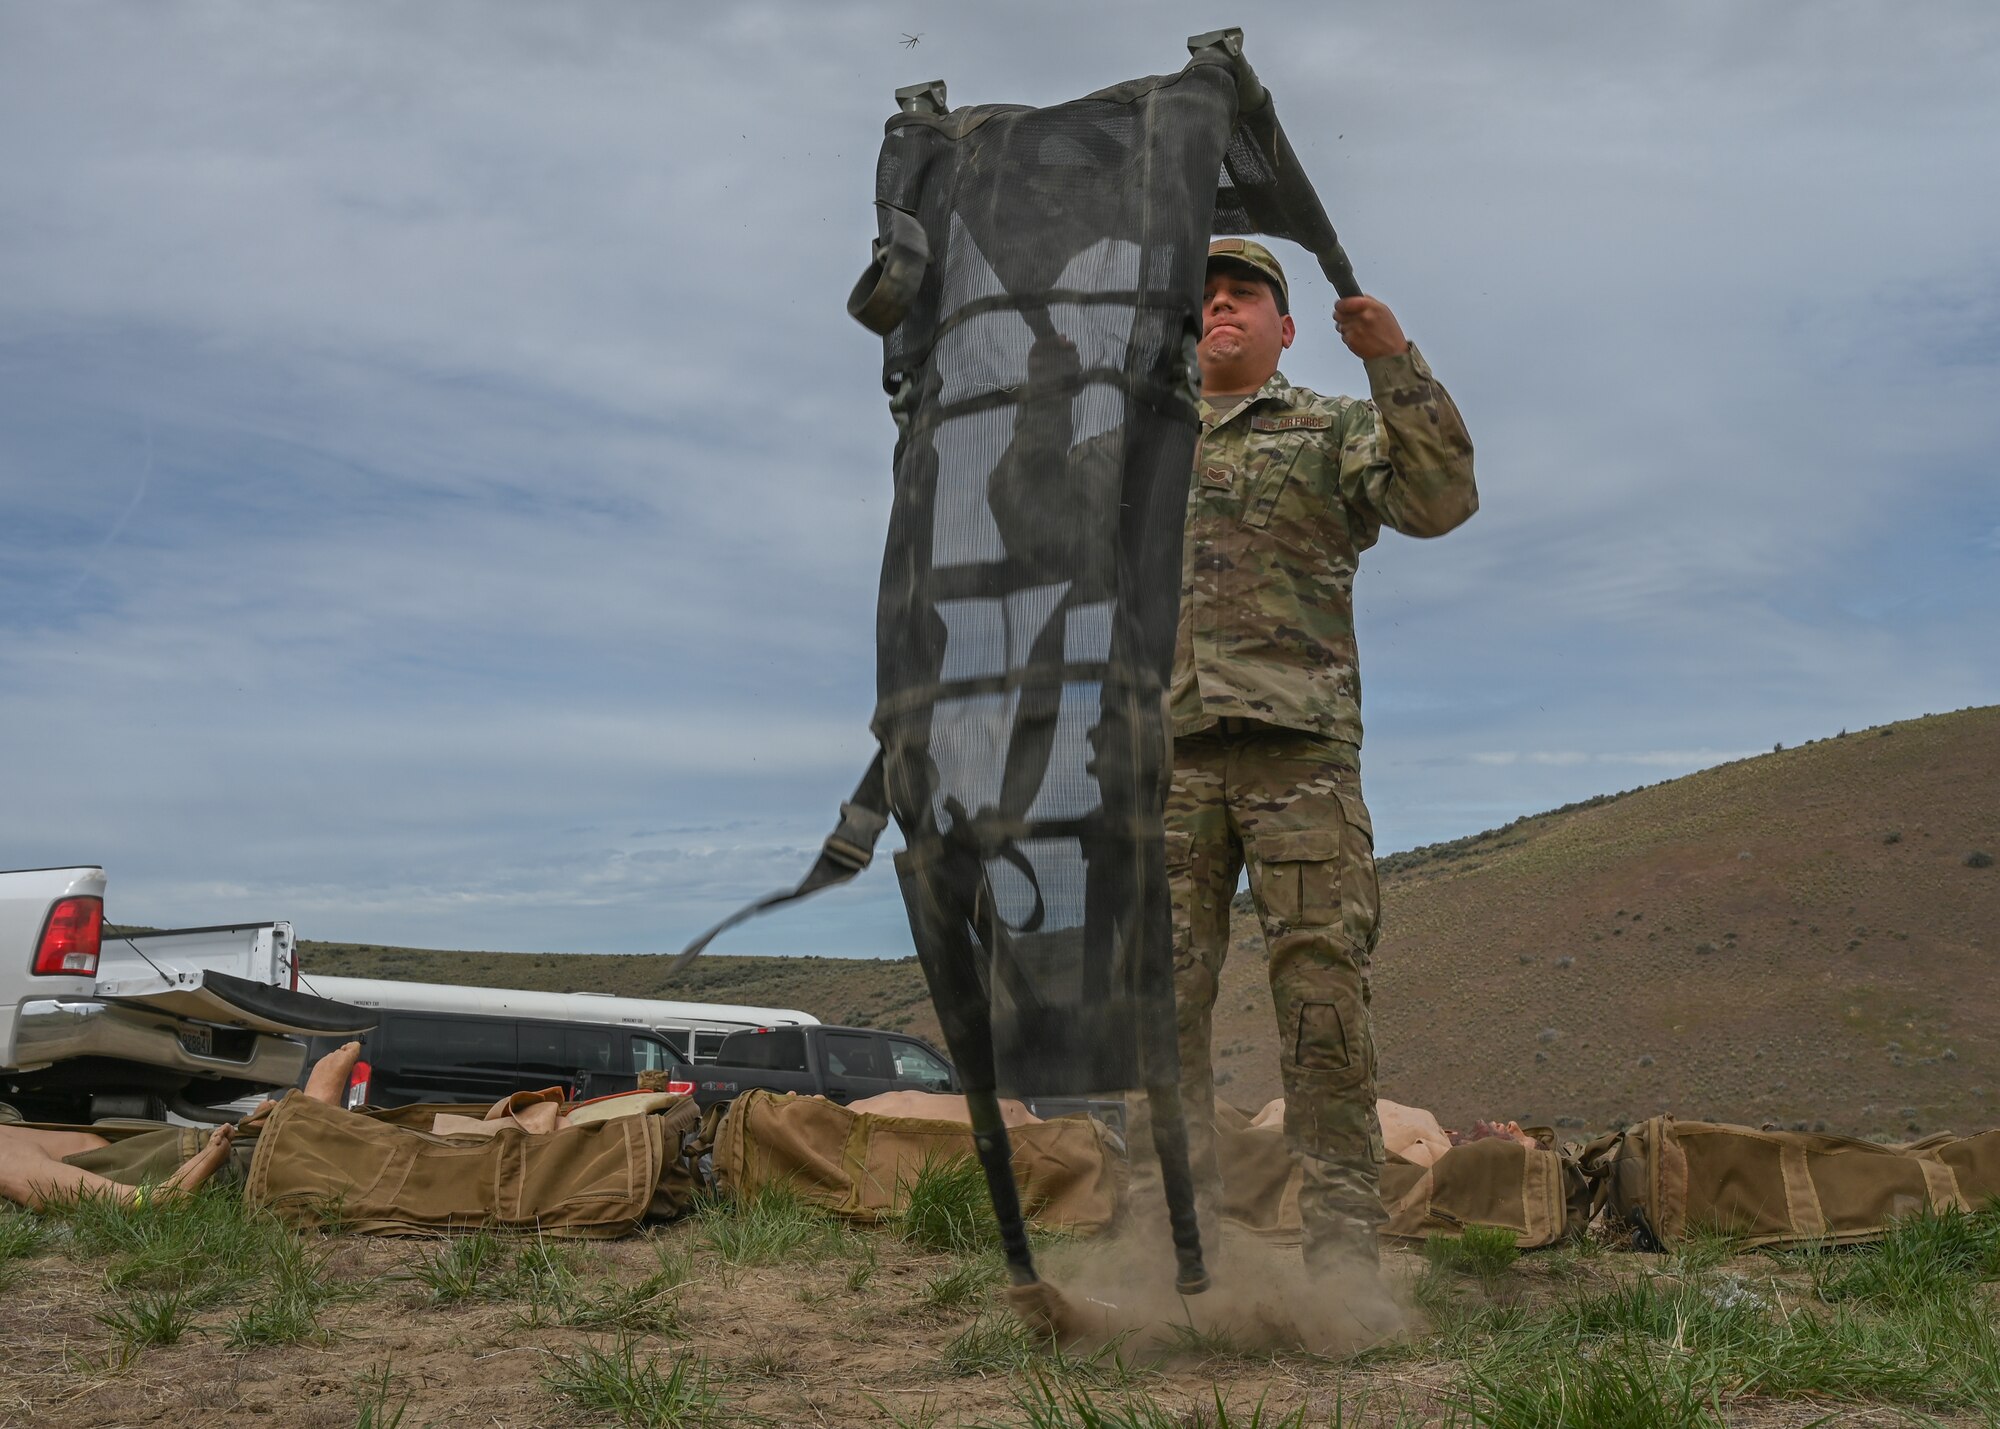 A U.S. Air Force tactical air control party Airman with the 5th Air Support Operations Squadron opens a skedco litter at Yakima Training Center, Washington, April 28, 2021. During the Over the course of their week-long field training exercise, TACP Airmen conducted various medical practices in order to meet changing tactical requirements and advance ground skill sets for varying mission requirements. (U.S. Air Force photo by Airman 1st Class Callie Norton)